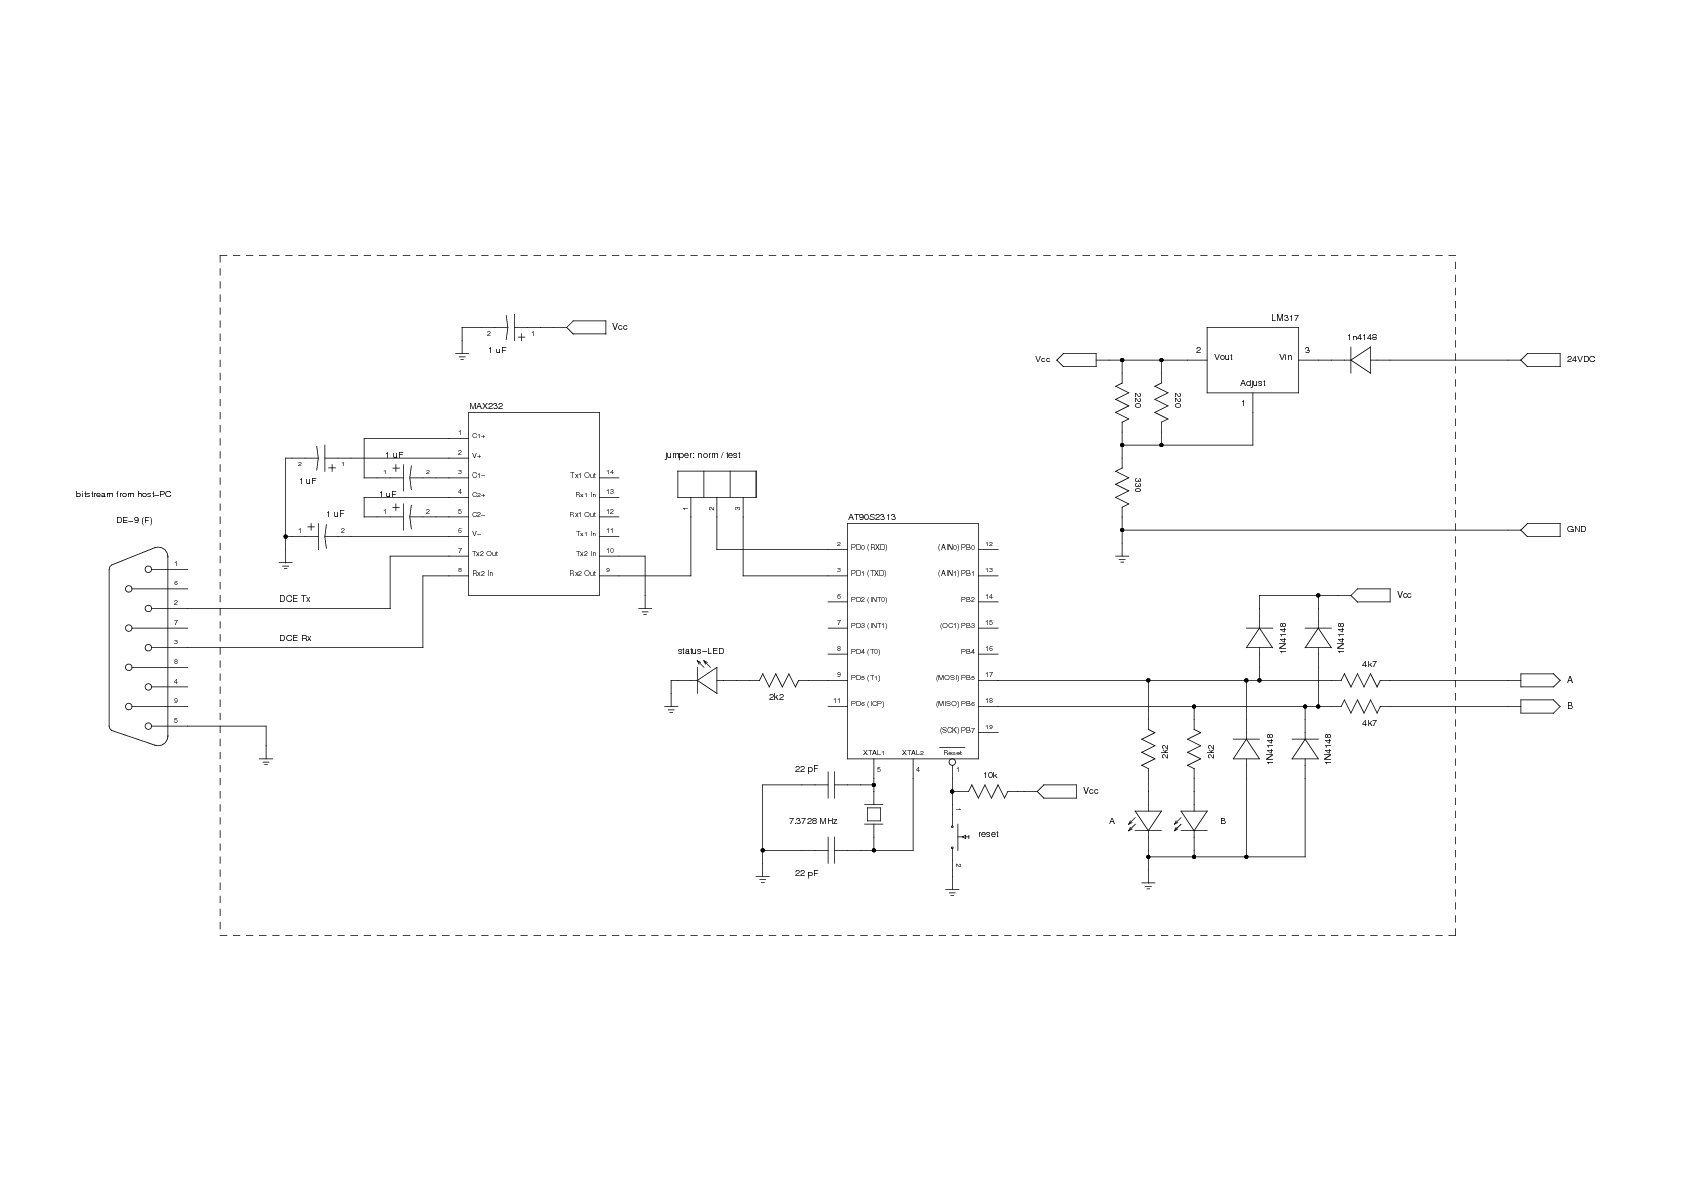 Fig.1: full schematic. An ATtiny2313 receives a constant bitstream from a host-PC, and outputs the next bit/sample on each of 2 output-channels at fixed intervals.